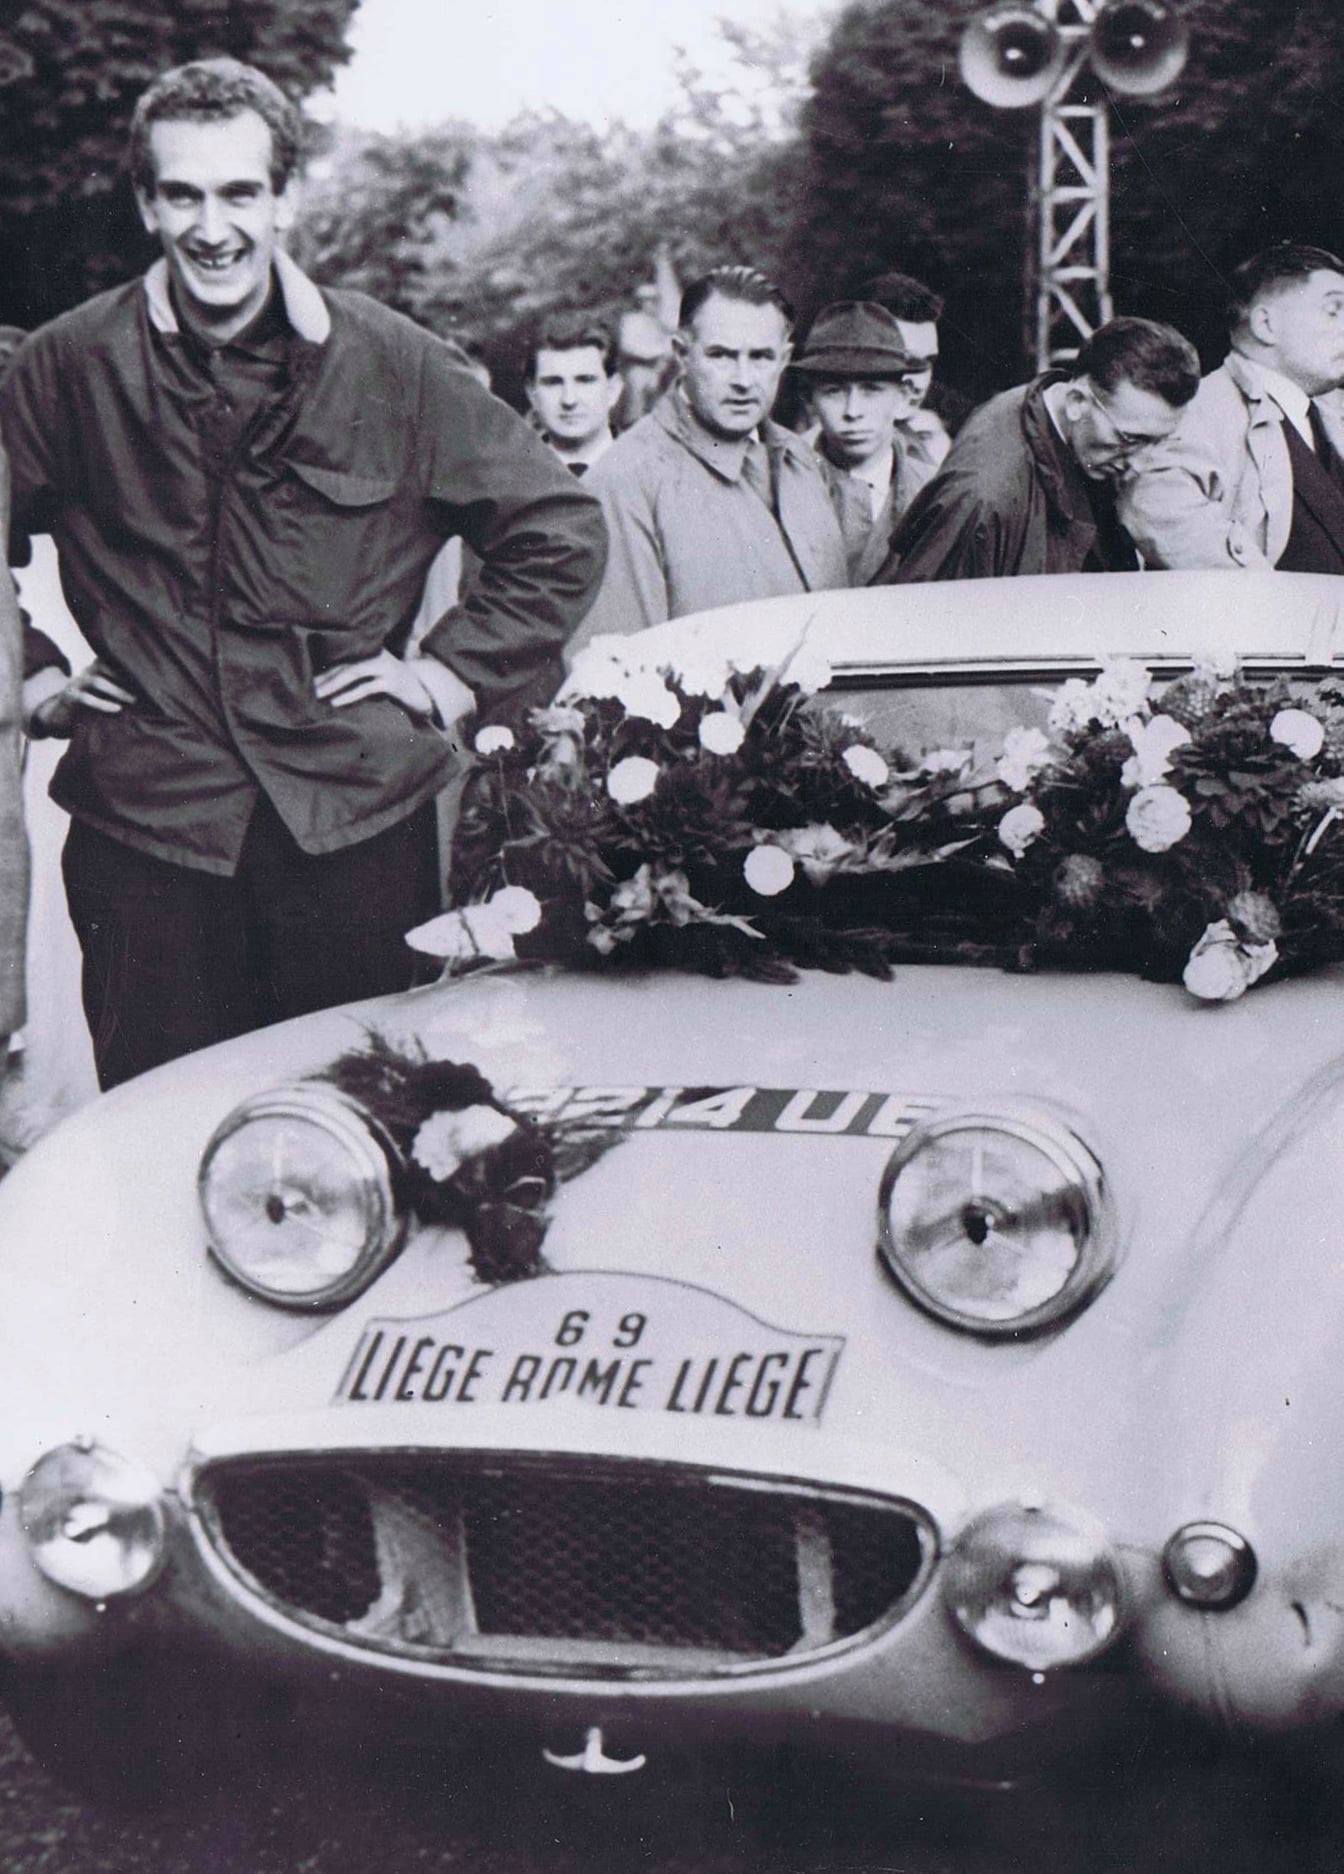 At the Liege-Rome-Liege event in 1960